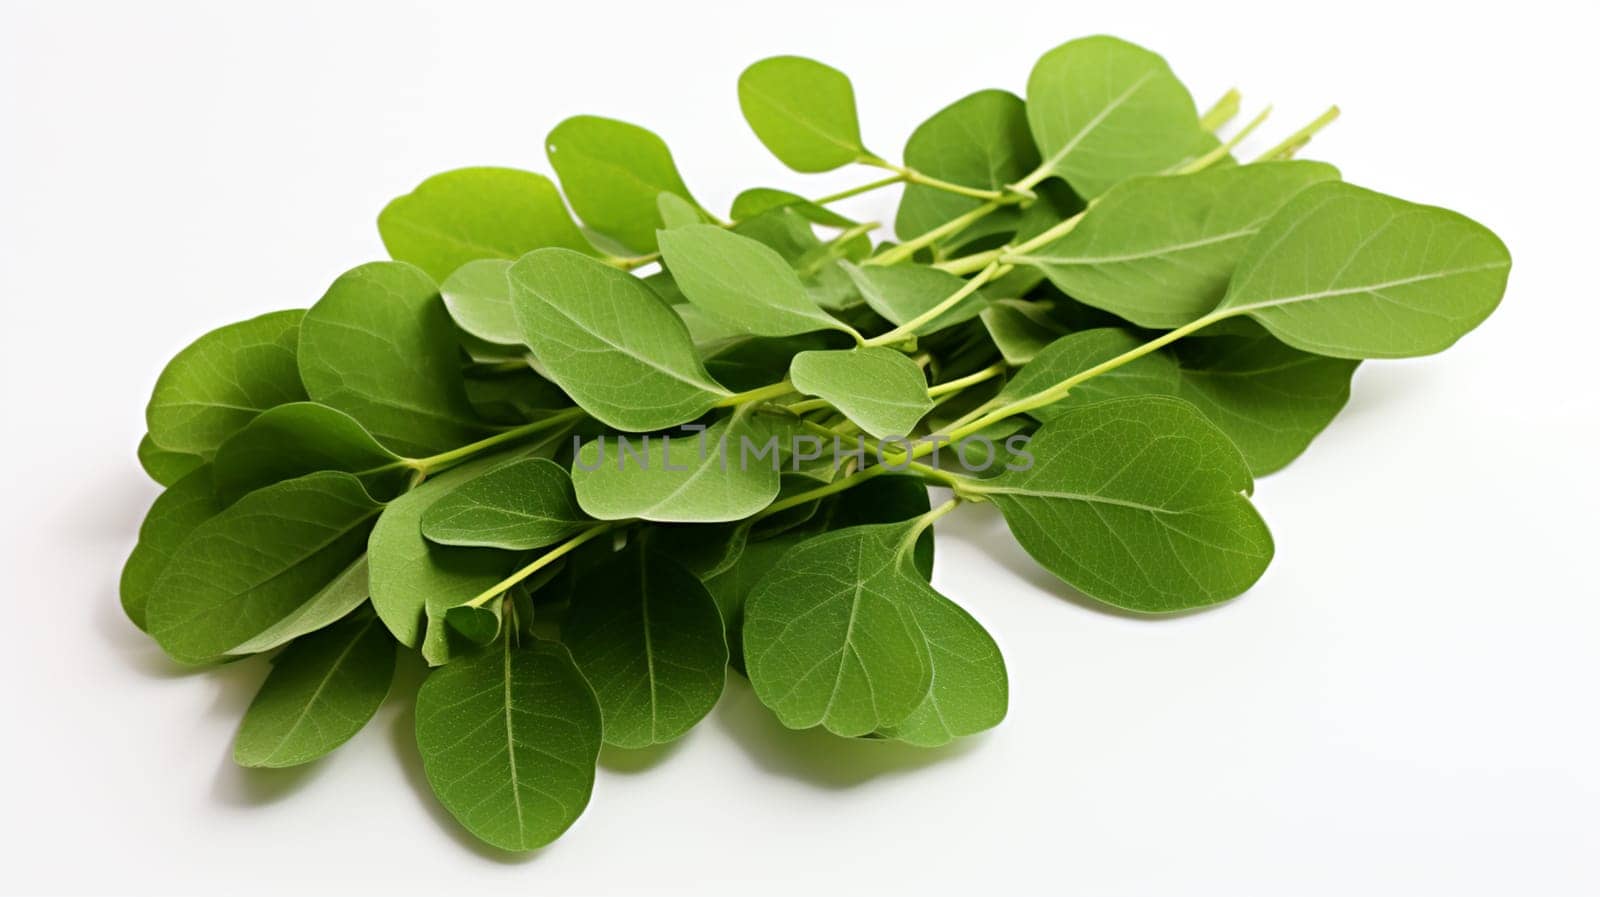 Green Moringa leaves  on white background with clipping path. Studio shot.Generate Ai by Mrsongrphc